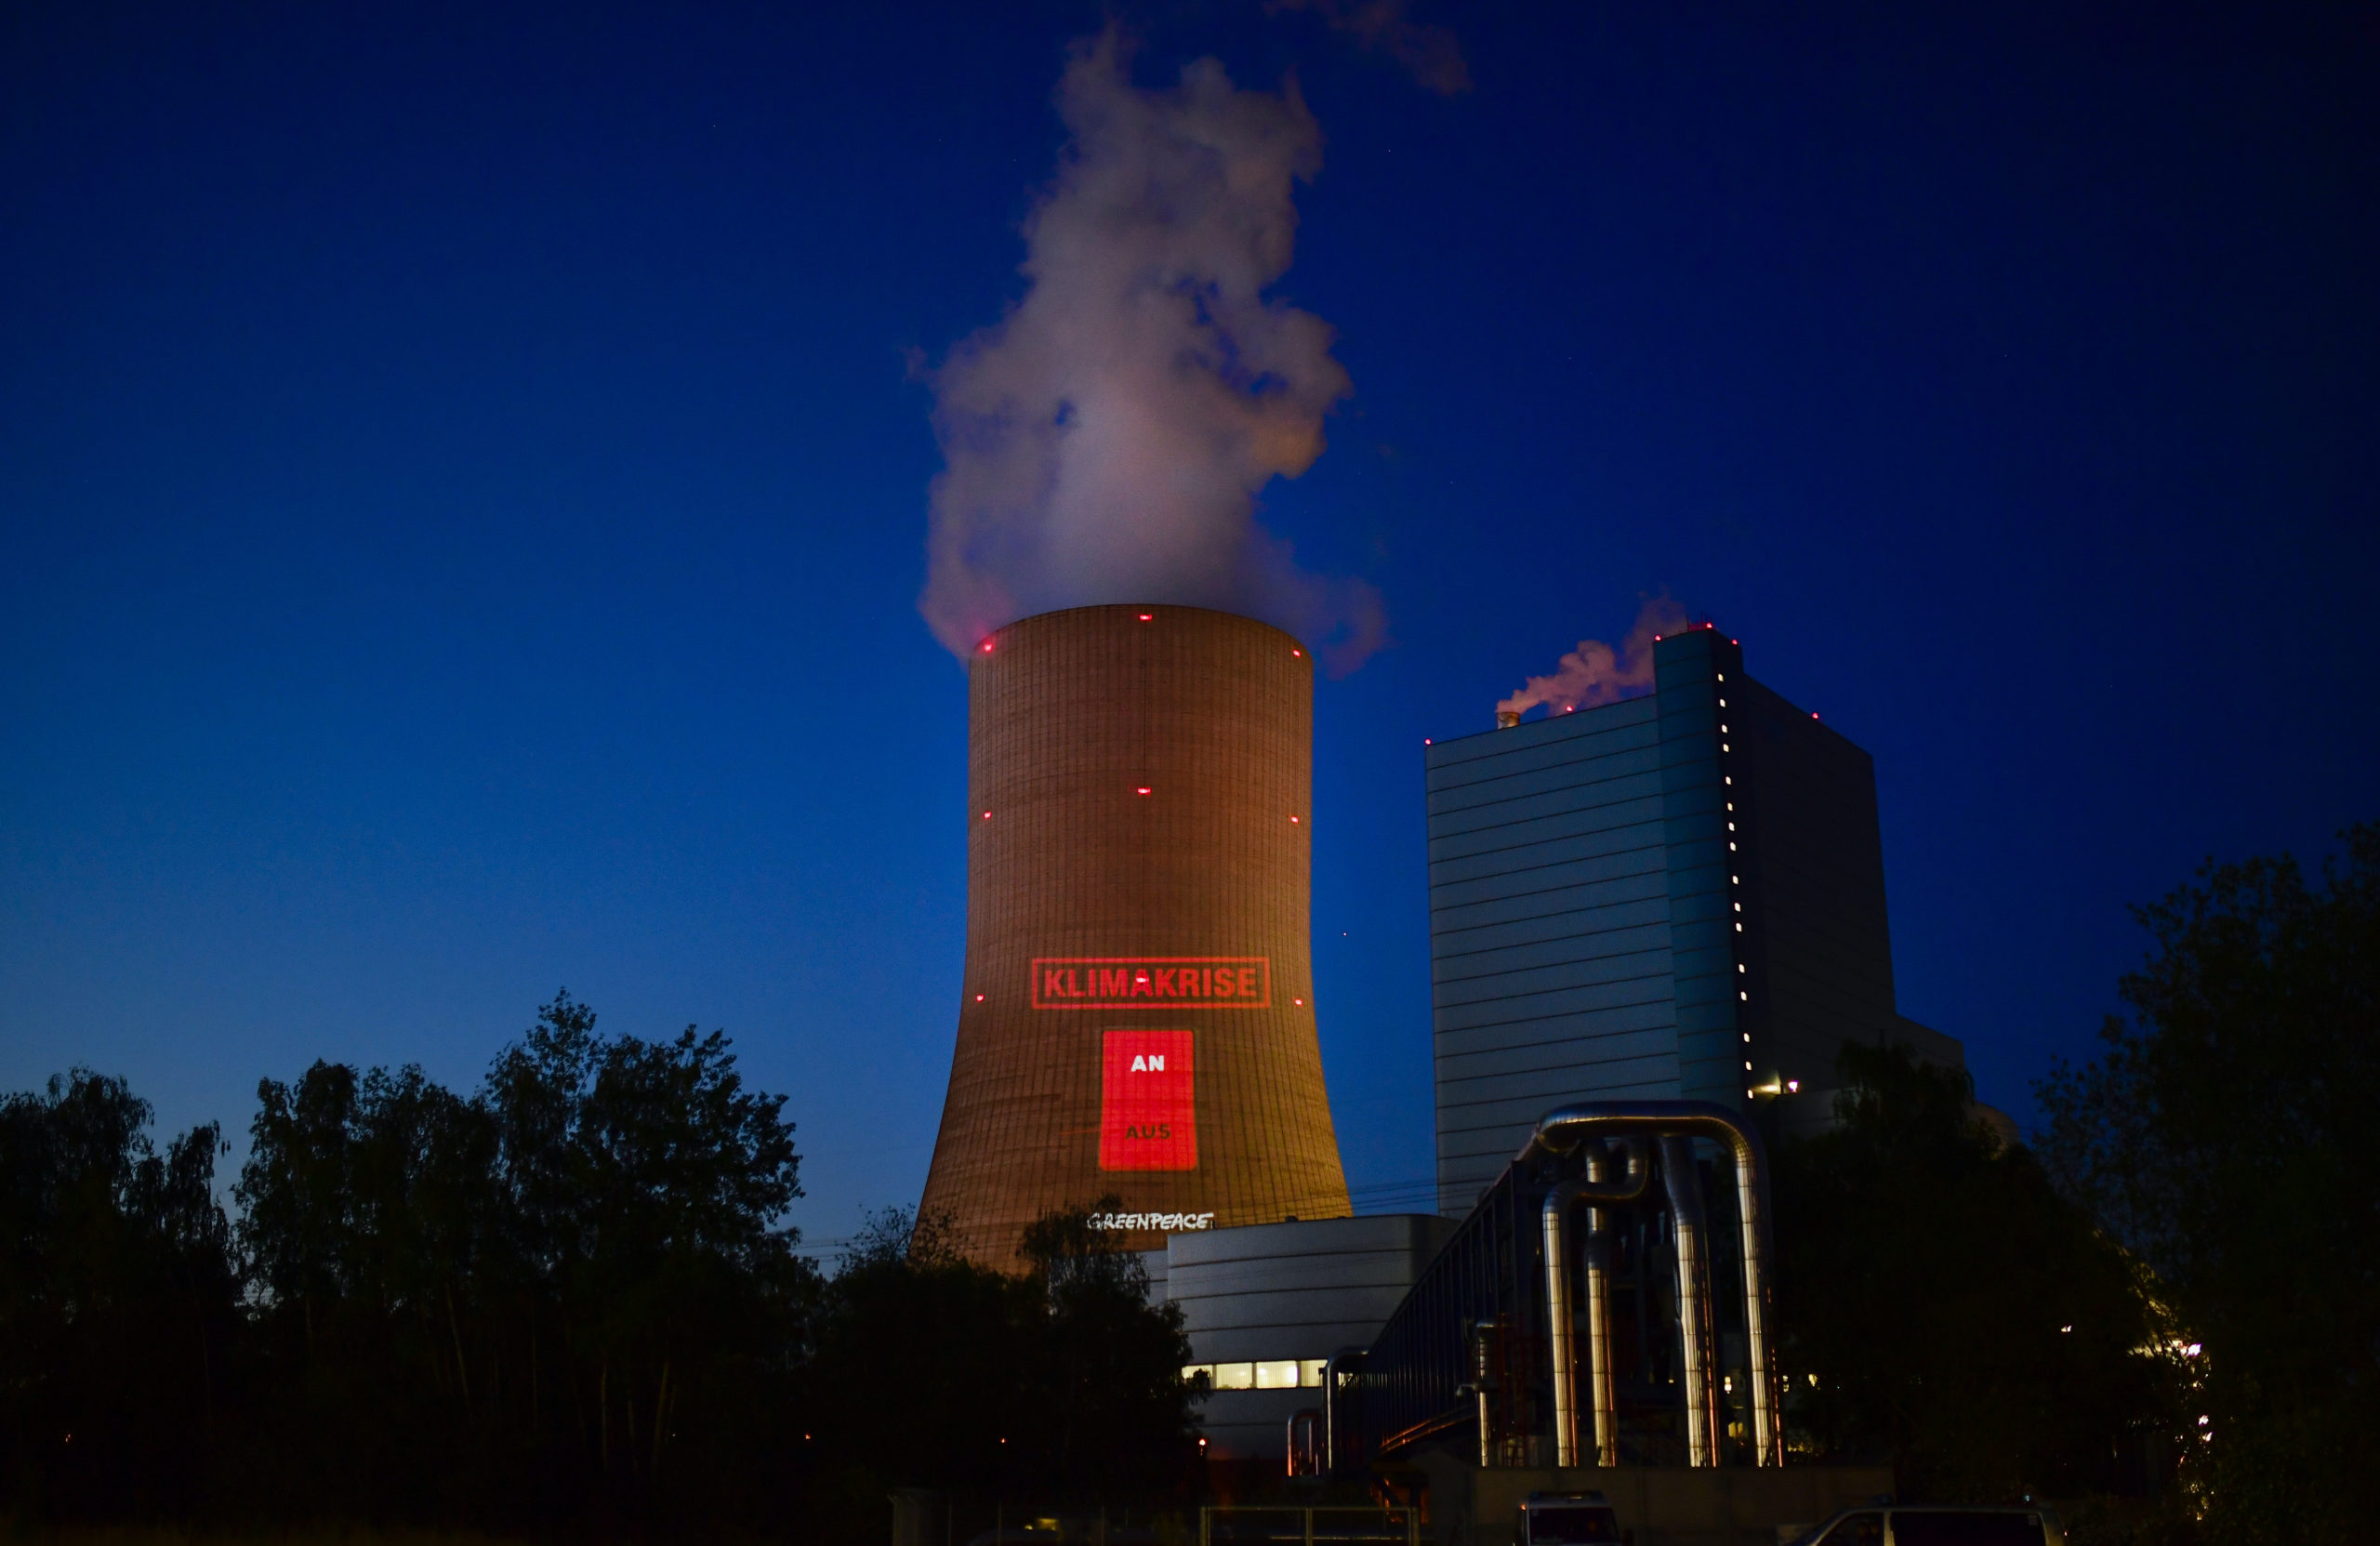 Germany to close coal power plants and tax CO2 in 2021